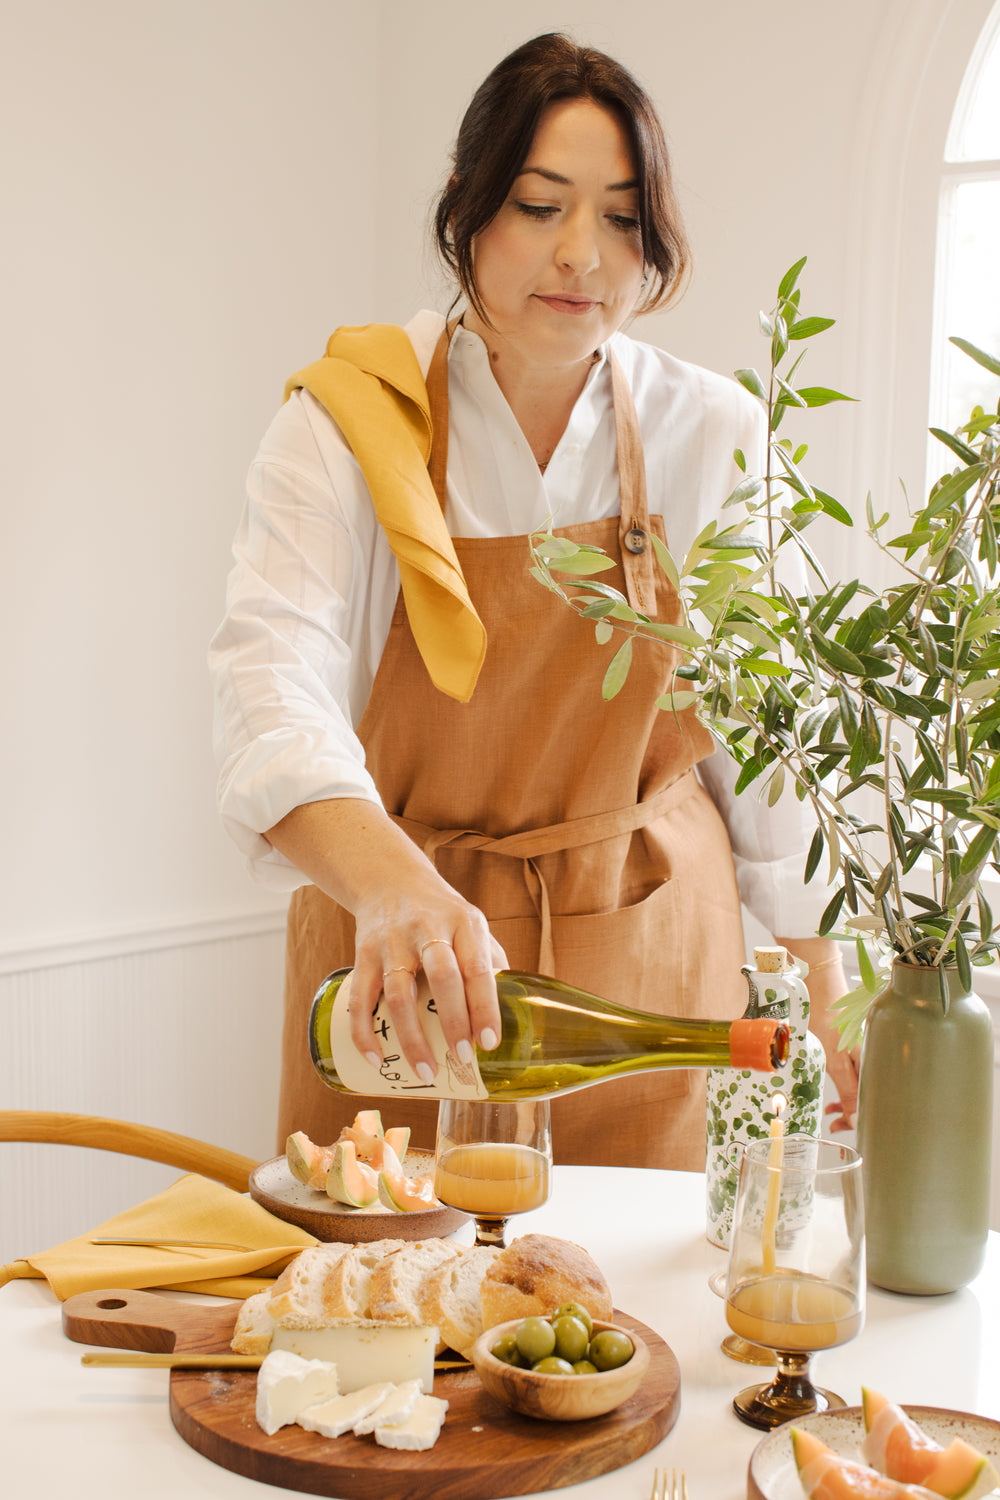 Linen Apron in Tan - Whimsy & Row